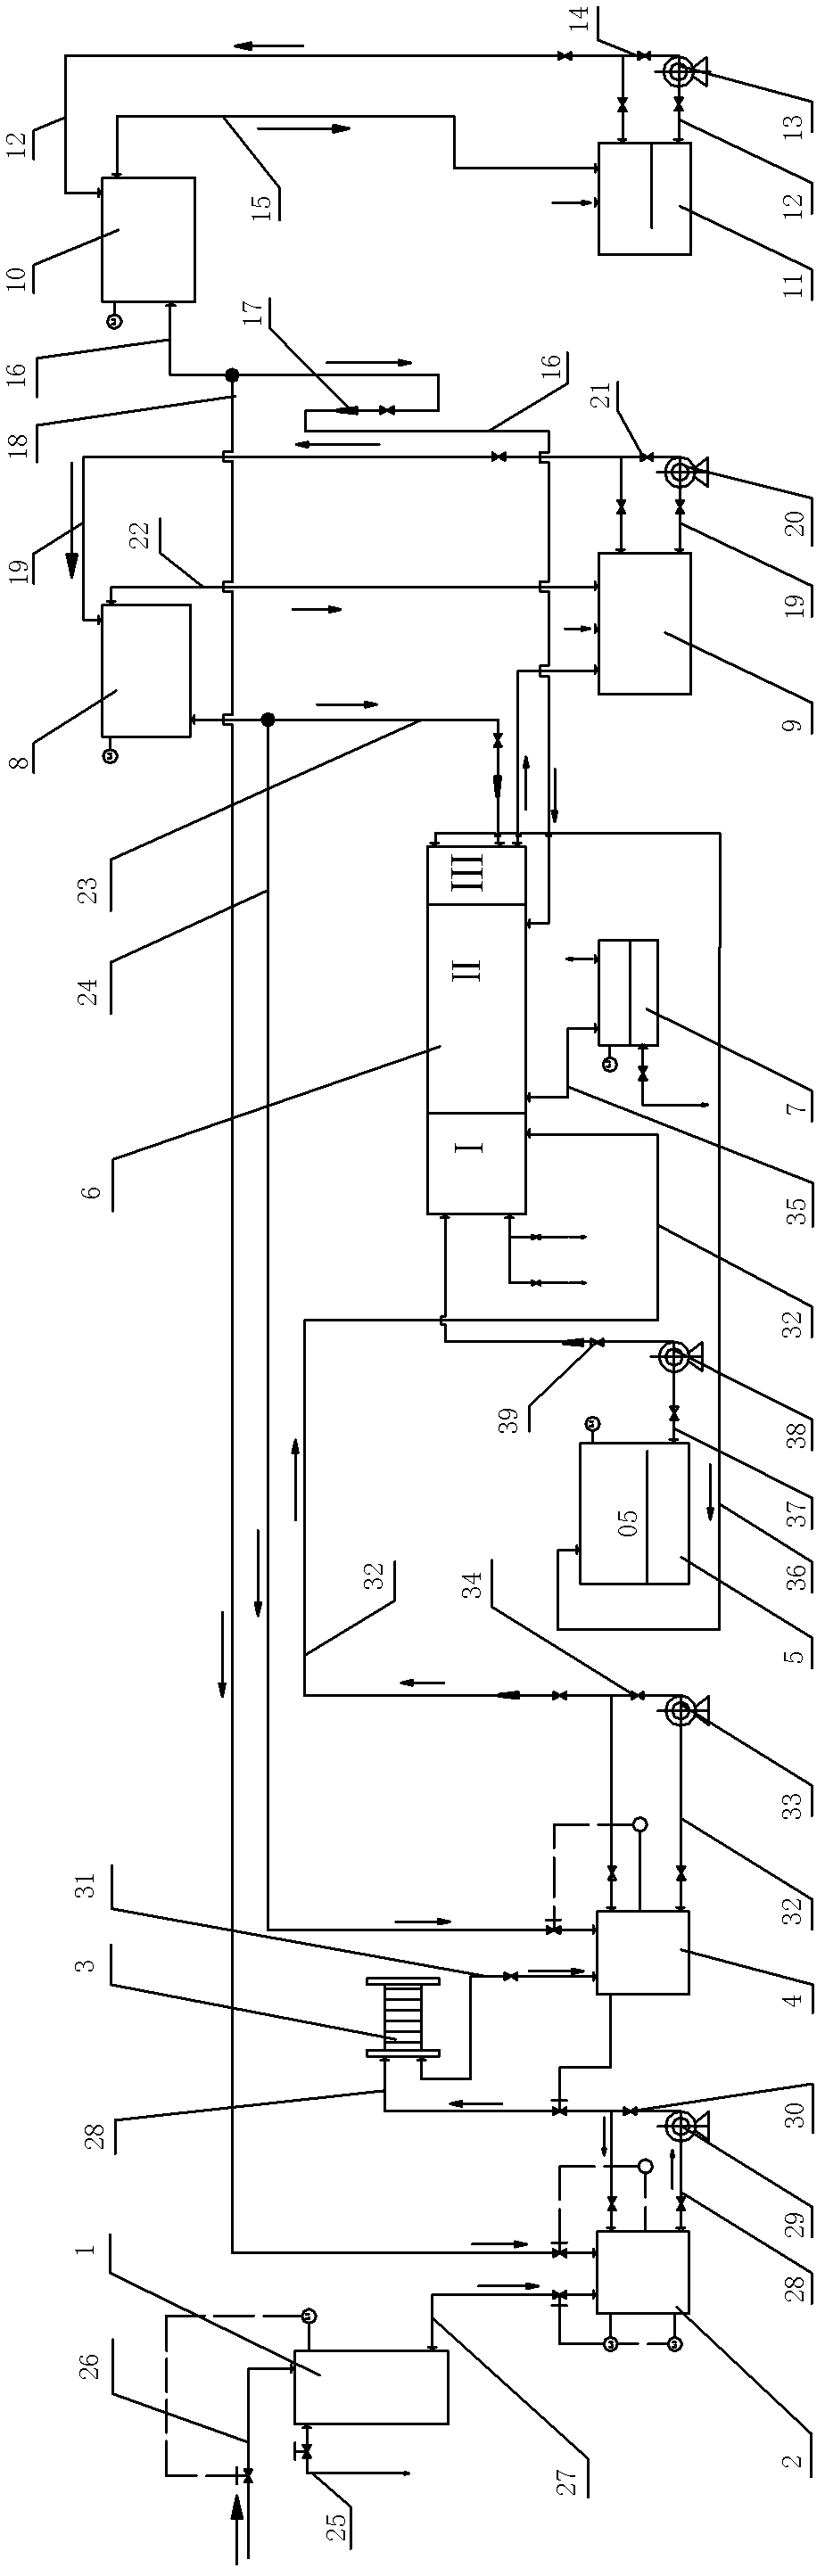 Process and device for treating and recycling chromium-containing waste liquor